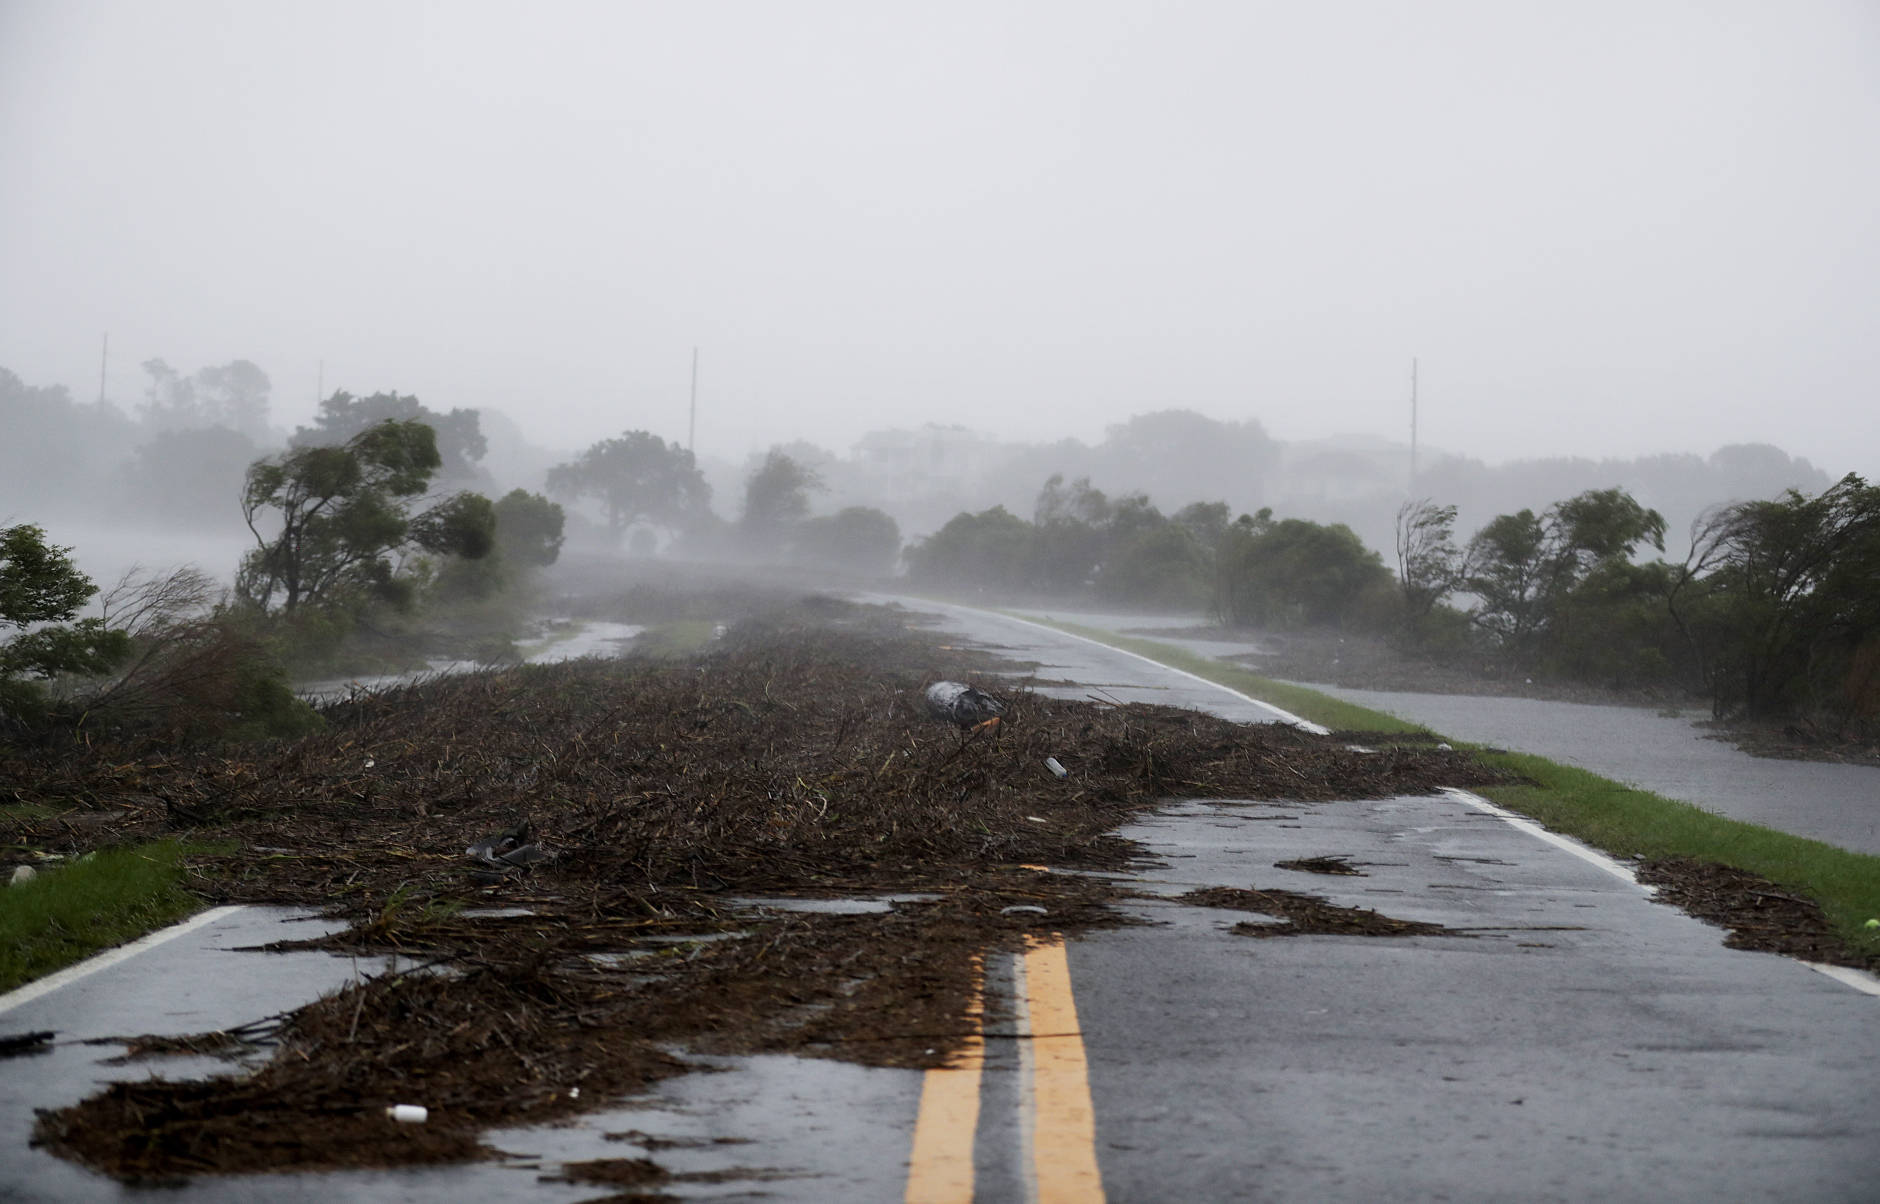 Debris litters a road after it washed over from Hurricane Matthew on St. Simons Island, Ga., Friday, Oct. 7, 2016. (AP Photo/David Goldman)